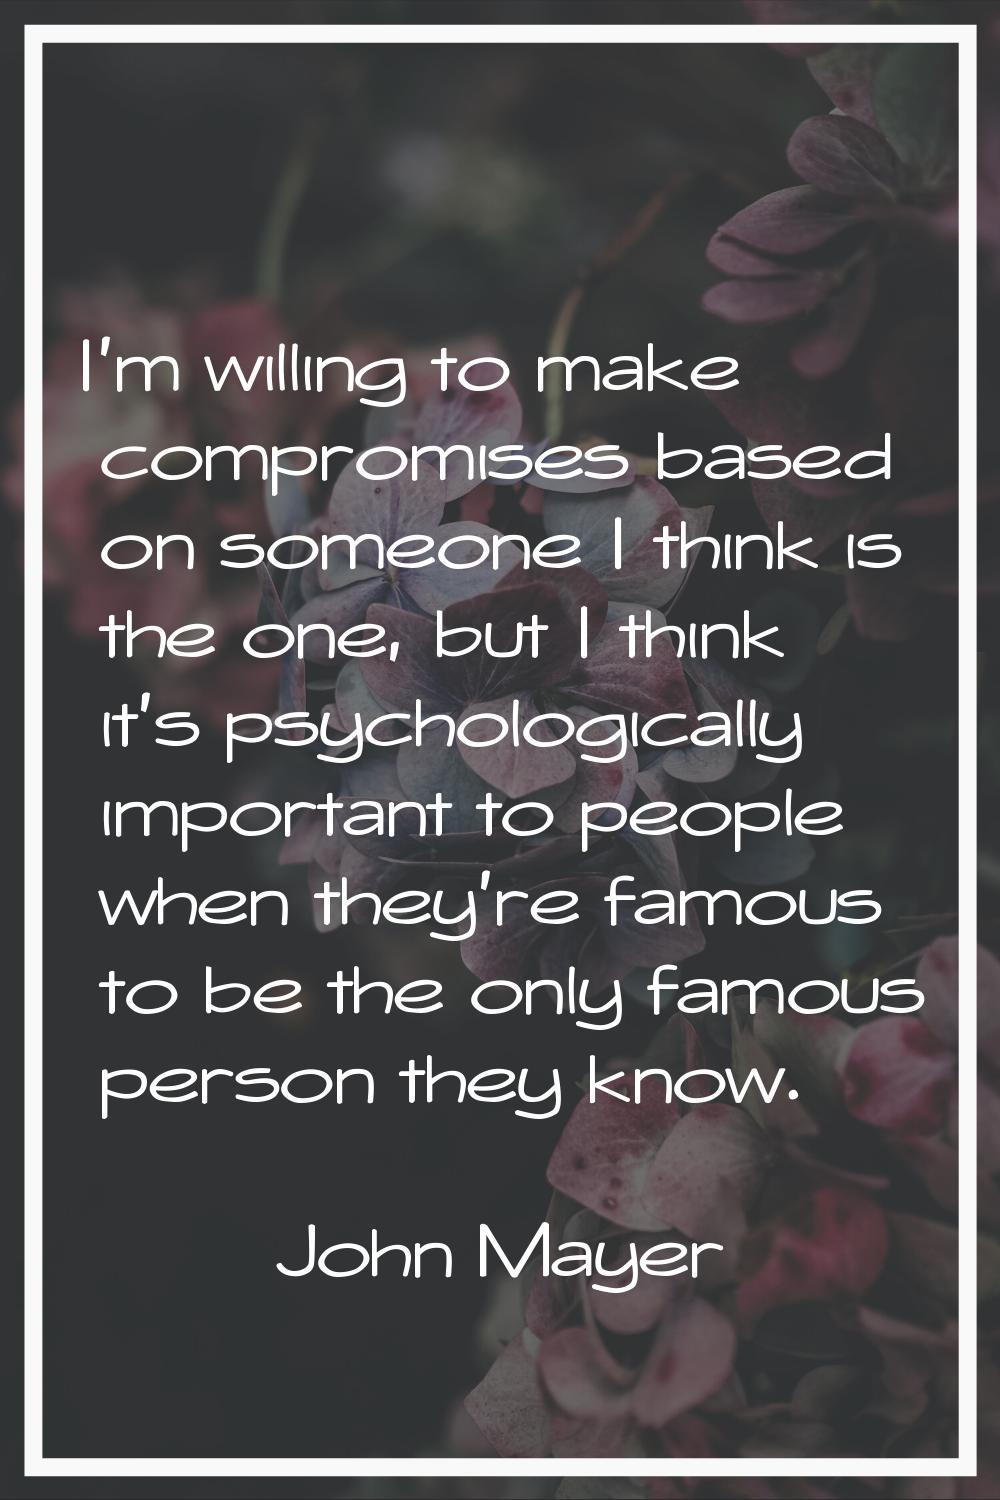 I'm willing to make compromises based on someone I think is the one, but I think it's psychological